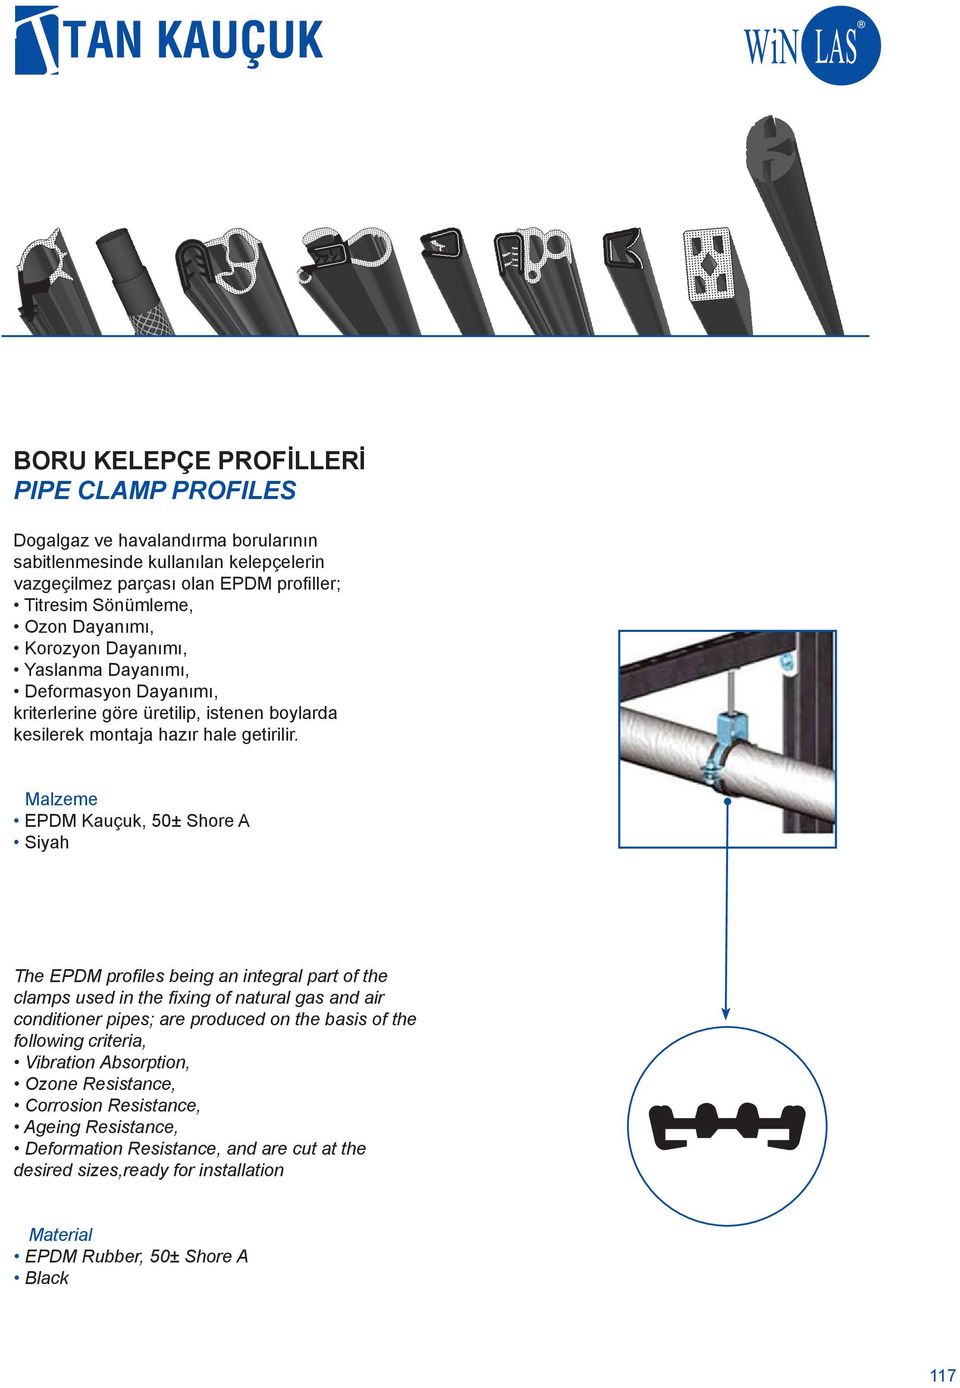 EPDM Kauçuk, 50± Shore A Siyah The EPDM profiles being an integral part of the clamps used in the fixing of natural gas and air conditioner pipes; are produced on the basis